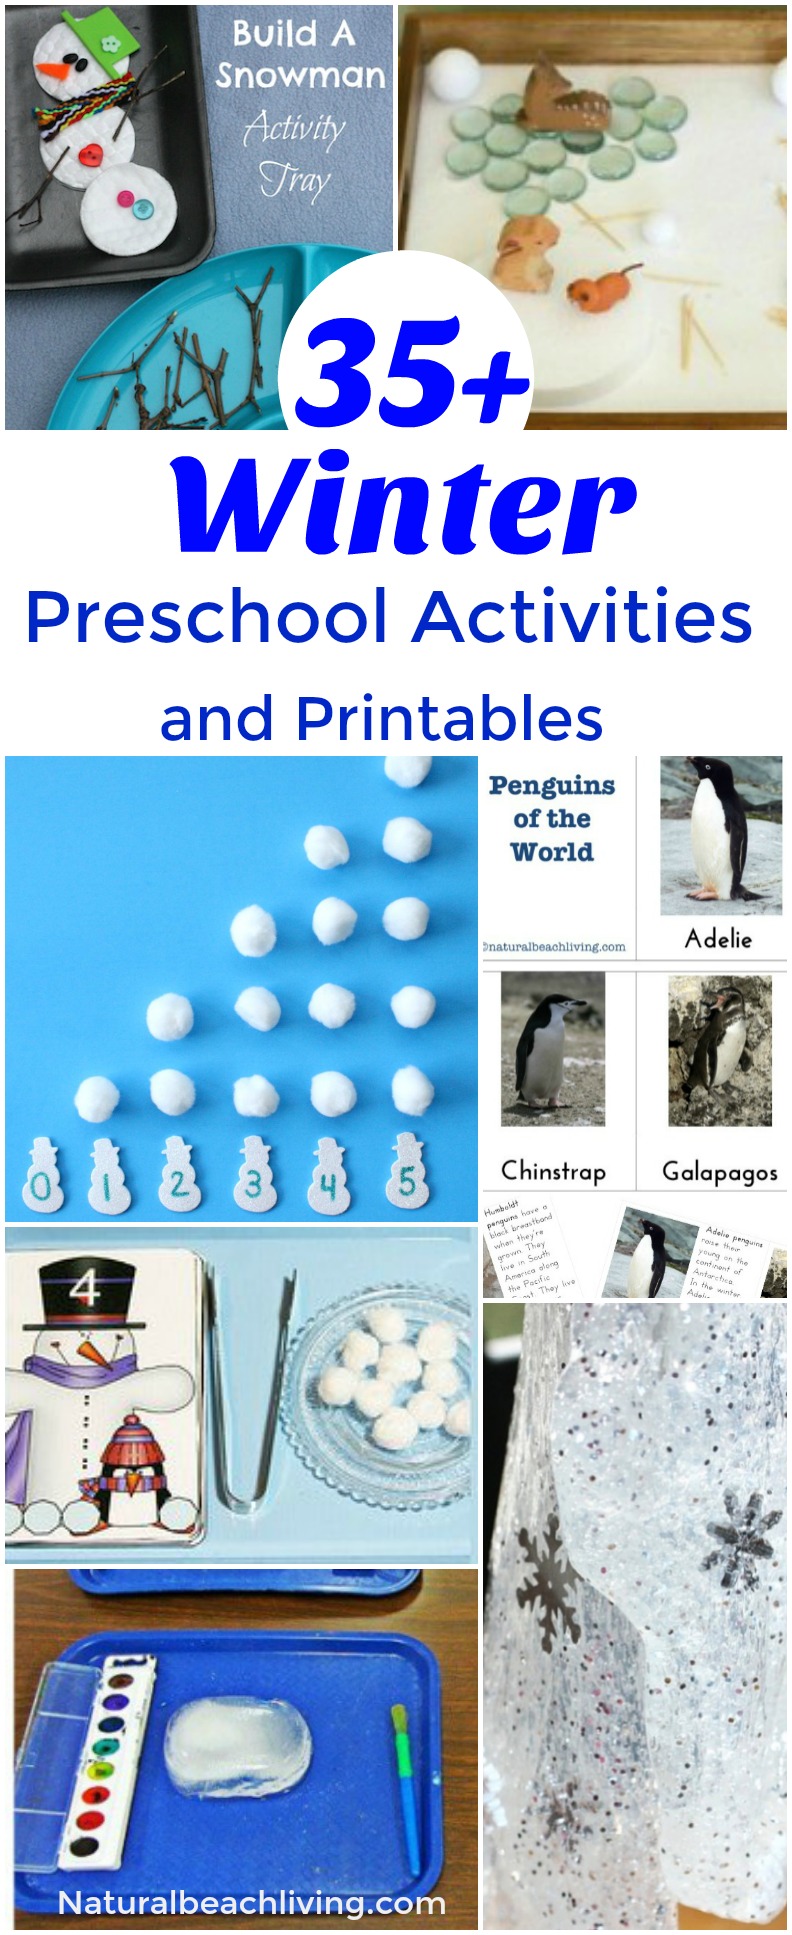 January Preschool Themes with Lesson Plans and Preschool Activities, These Fun January Preschool Activities explore winter, BEARS, Winter Animals, Nature, Penguins, Snow and so much more. Preschoolers will enjoy these fun hands on activities with monthly winter themes that include List of Themes for Preschool, January Holidays, Preschool Activities, and Preschool Lesson Plans for the Year